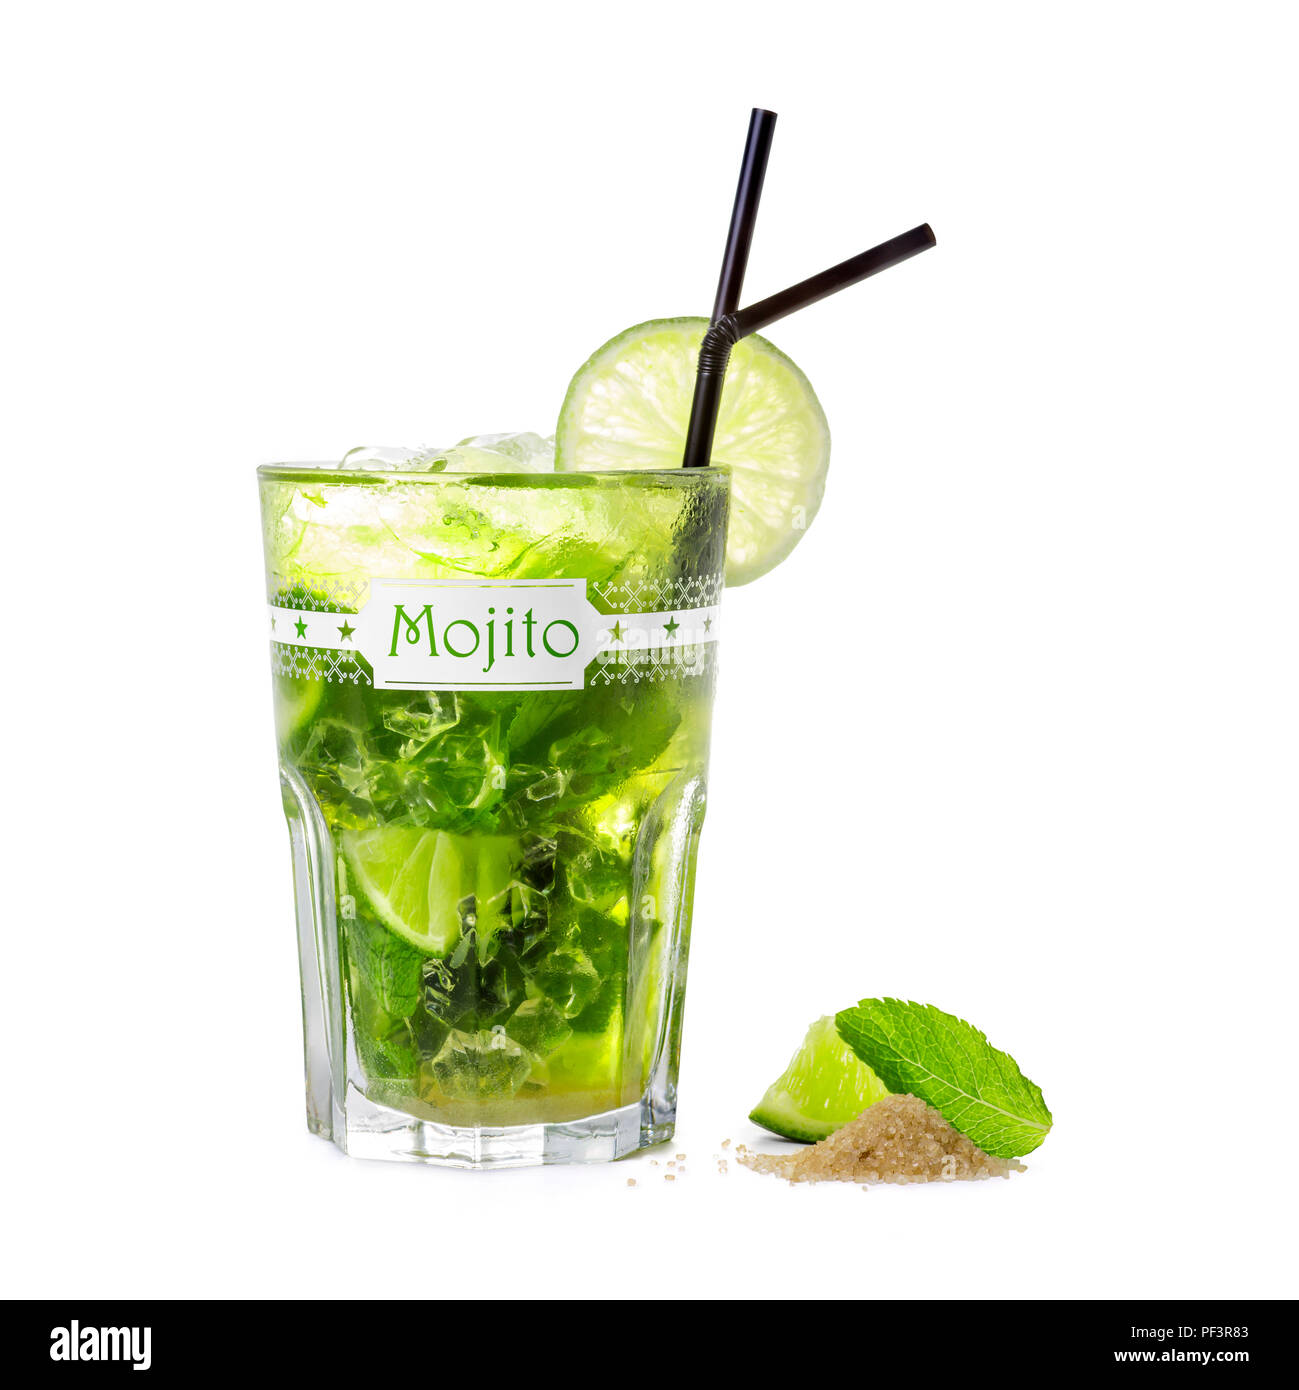 https://c8.alamy.com/comp/PF3R83/a-mojito-cocktail-photographed-on-a-white-background-it-is-a-very-refreshing-drink-for-hot-summer-days-PF3R83.jpg